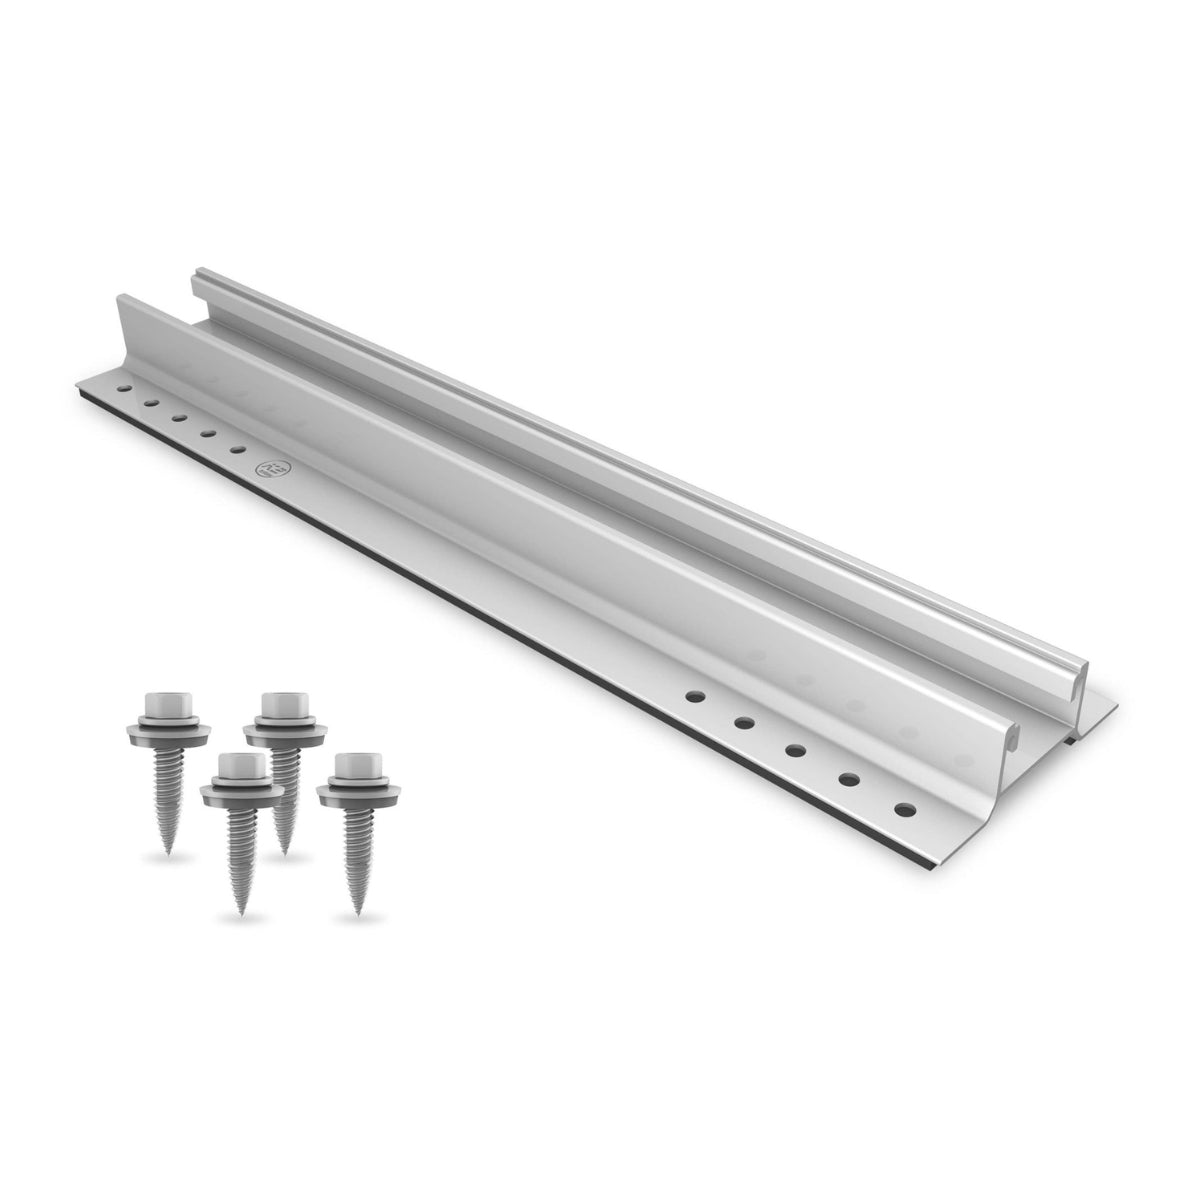 K2-Systems IBR Roof MiniRail MK2 4 Panel Roof Mounting System